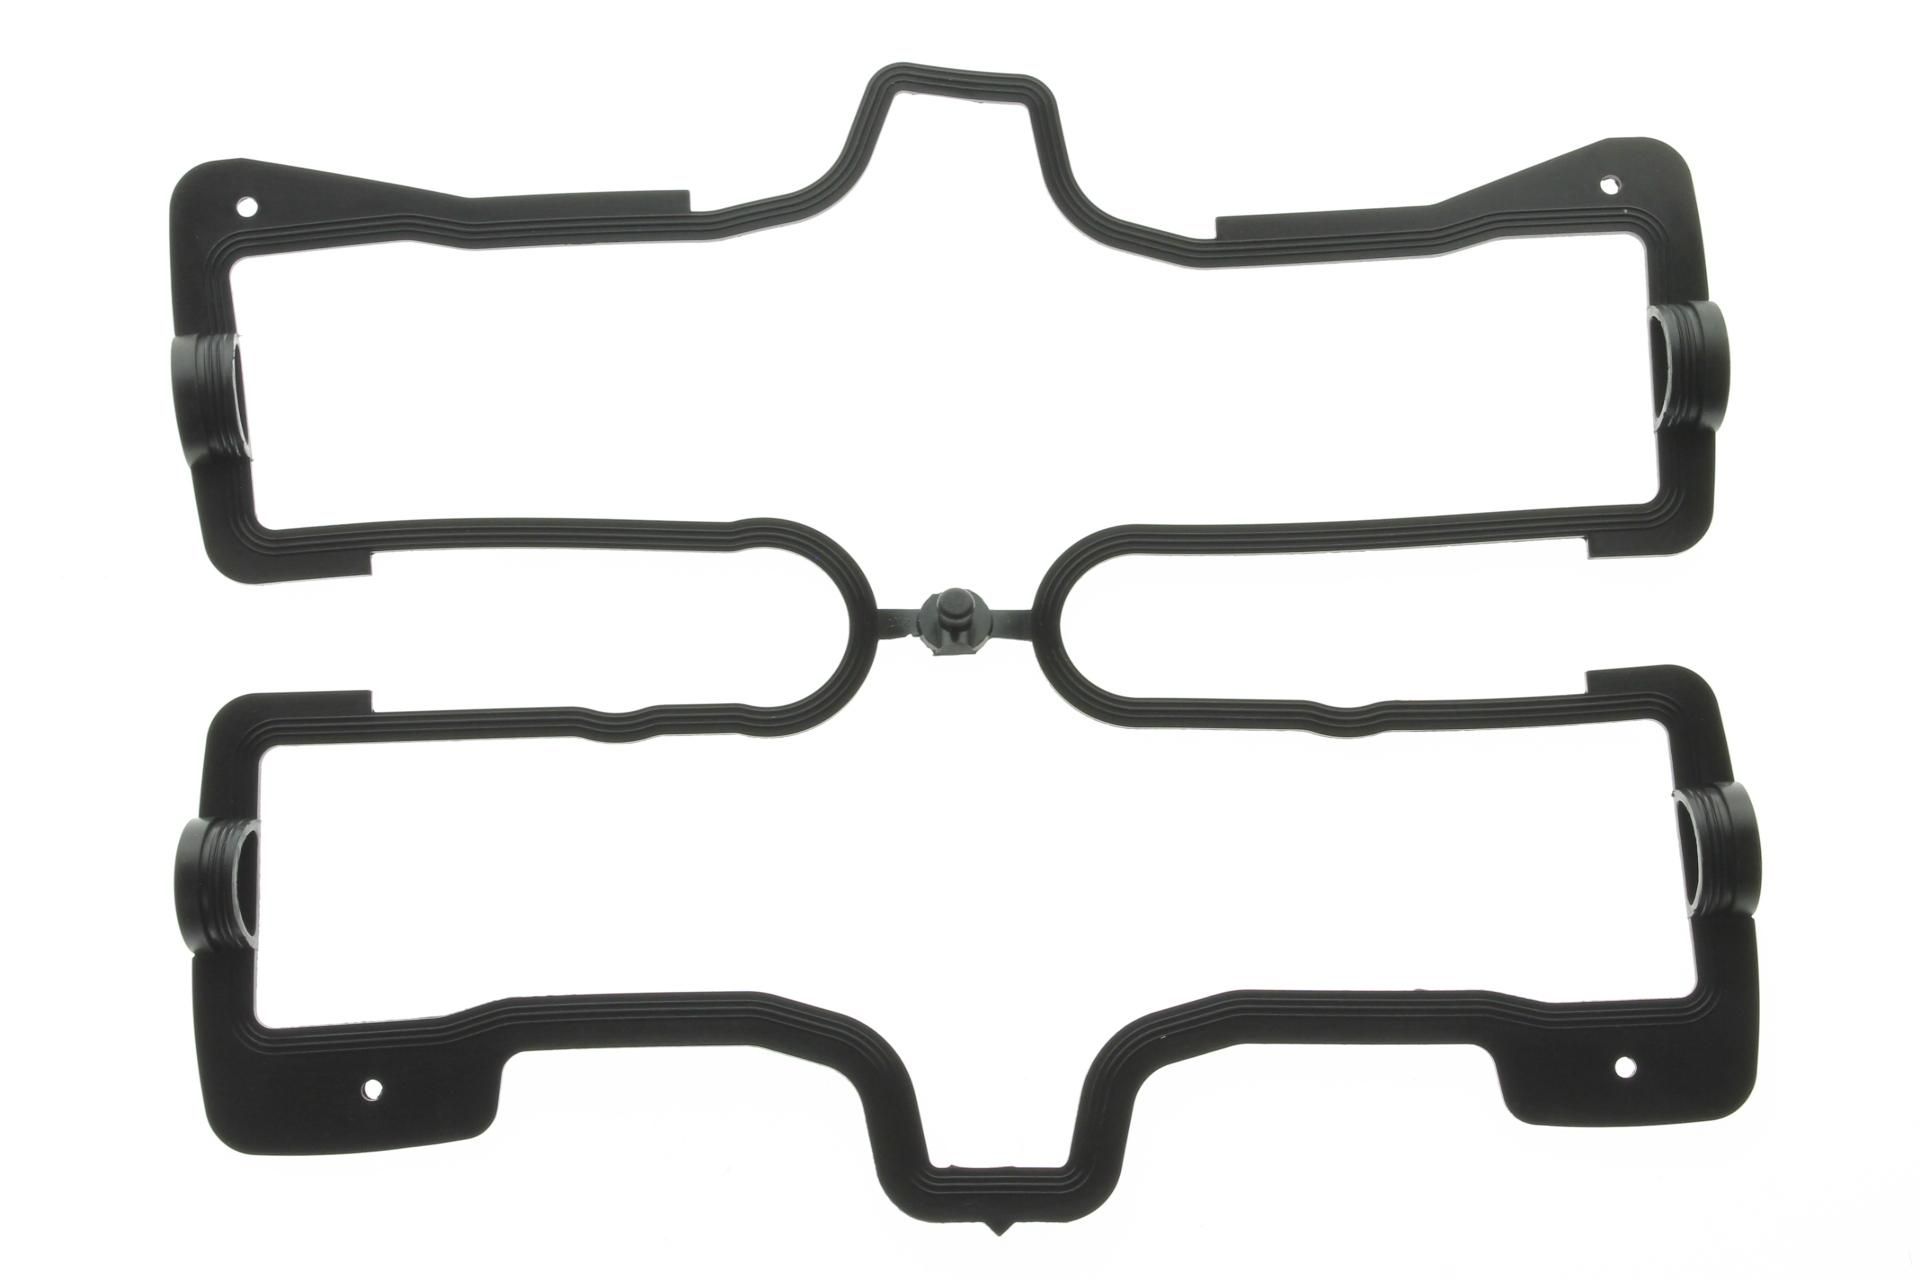 4NK-11193-00-00 HEAD COVER GASKET